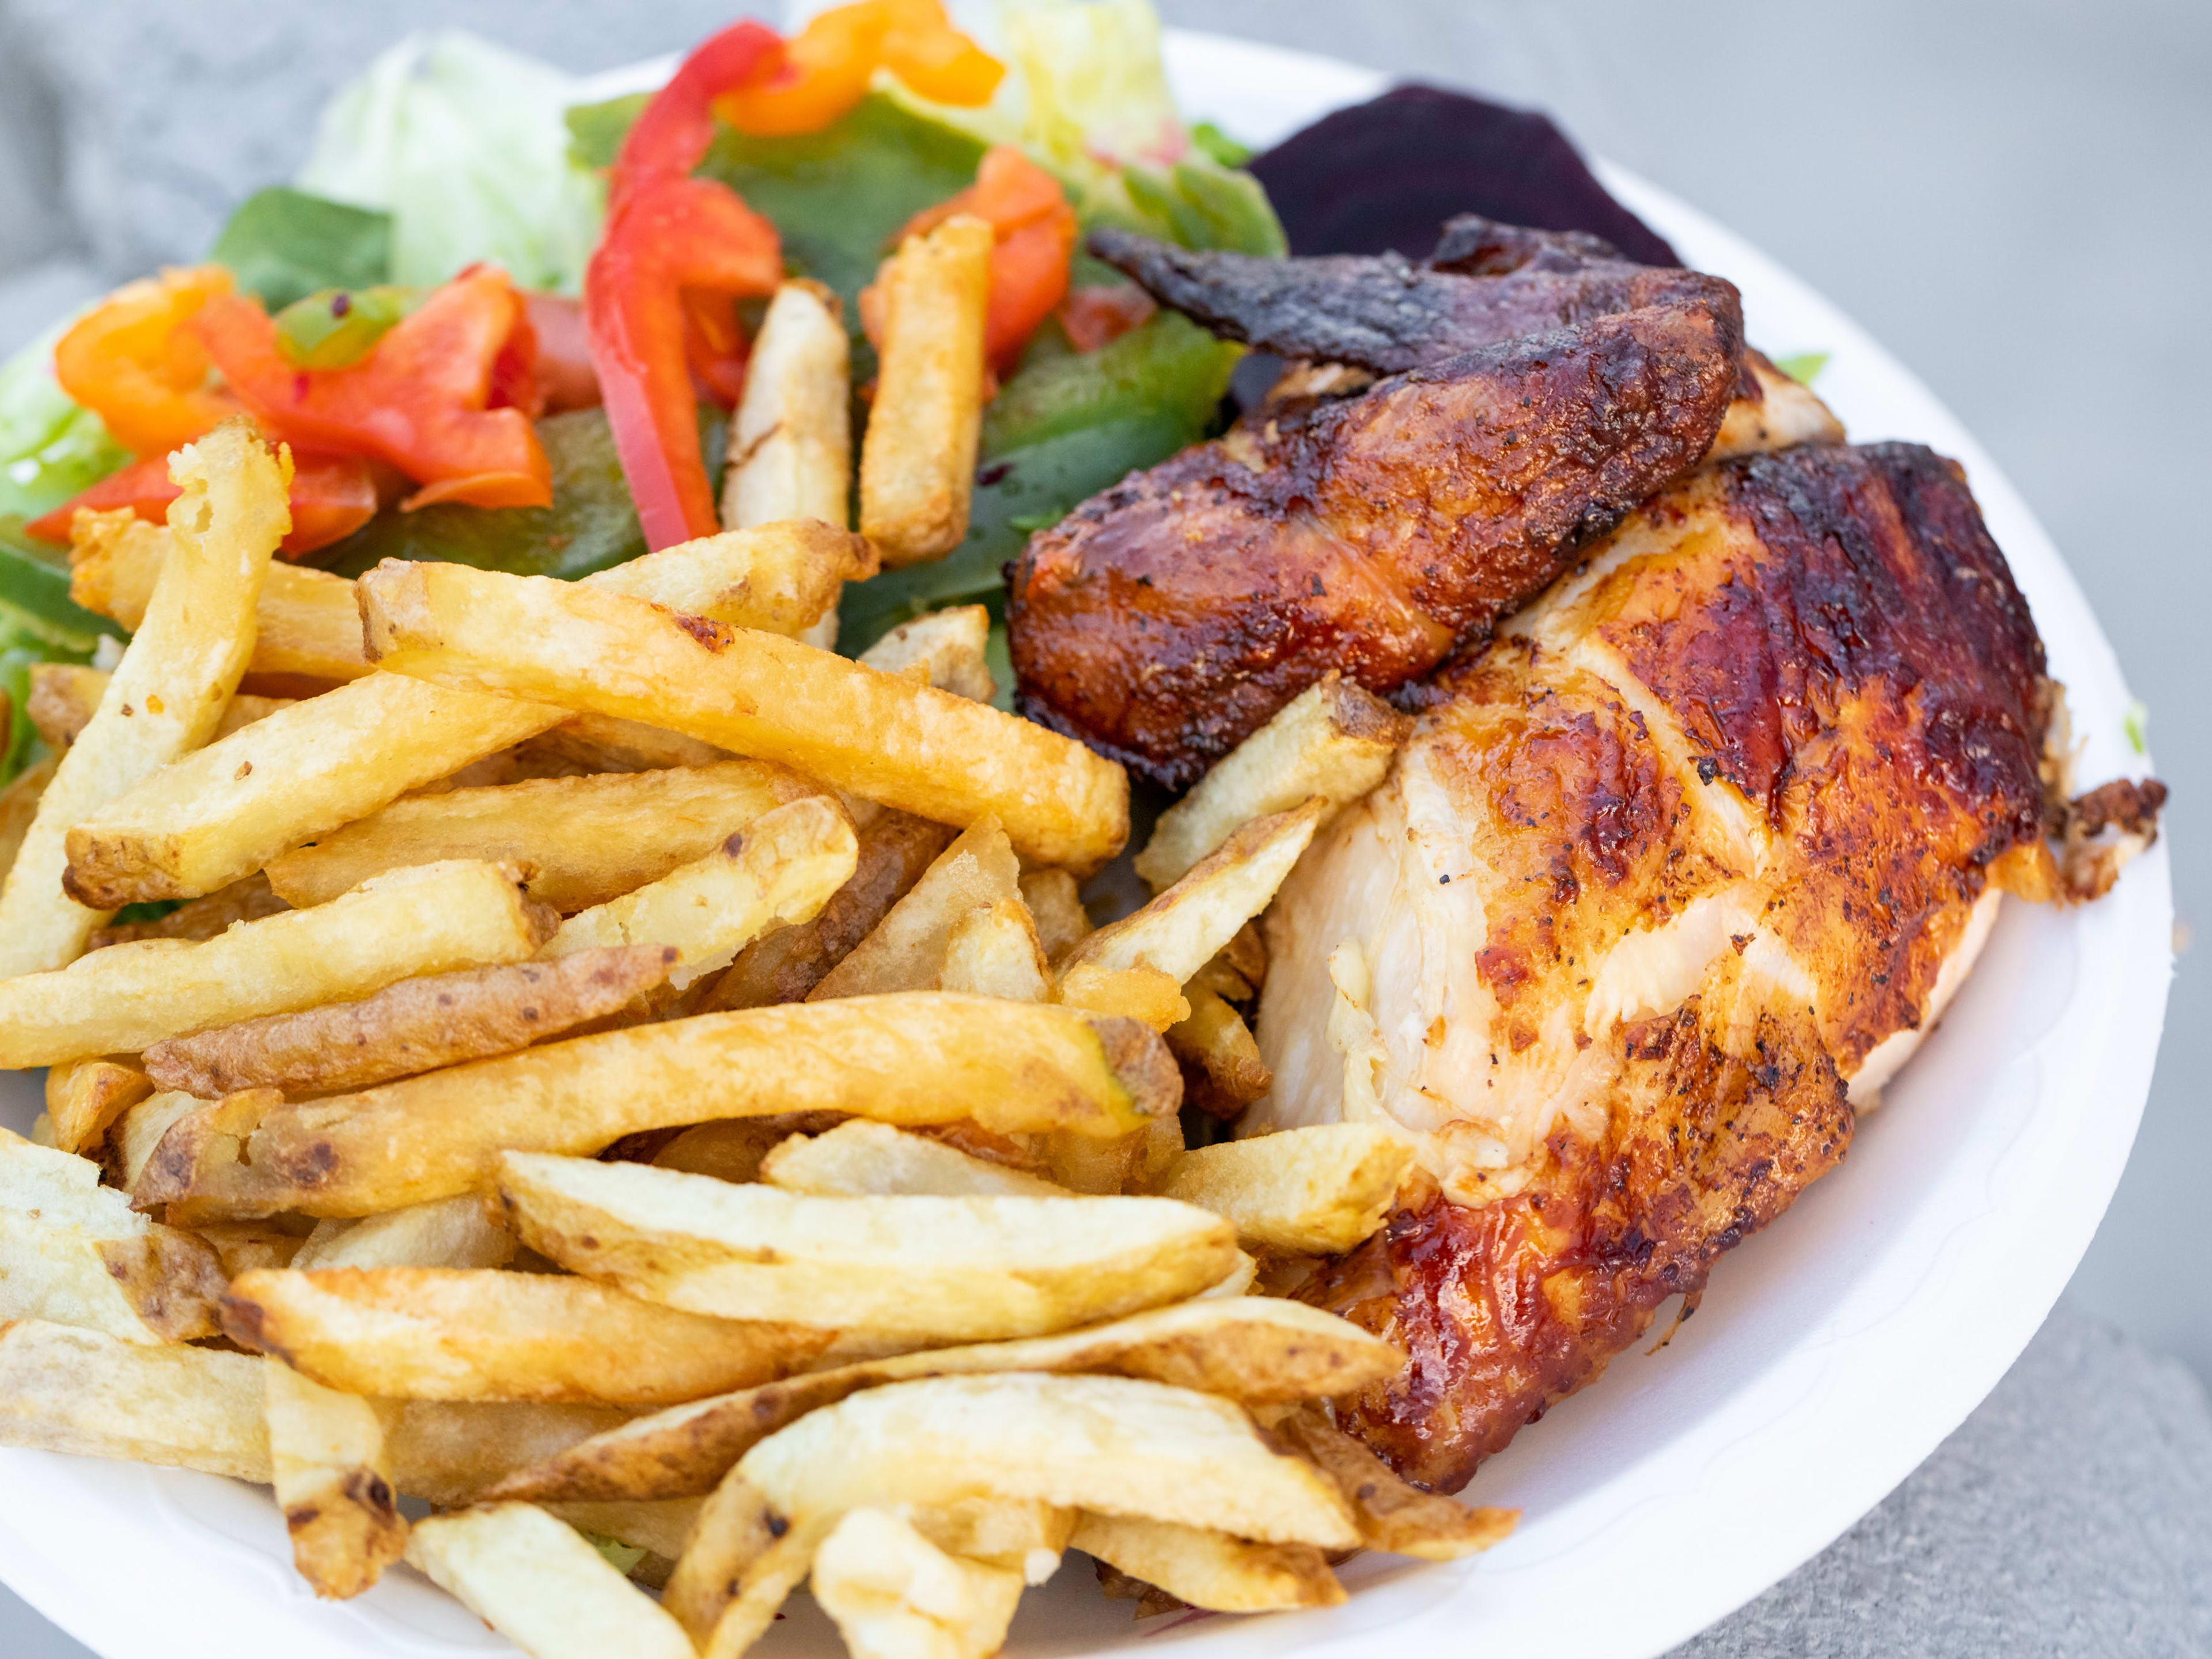 The rotisserie chicken from Pollo A La Brasa served with salad and fries.